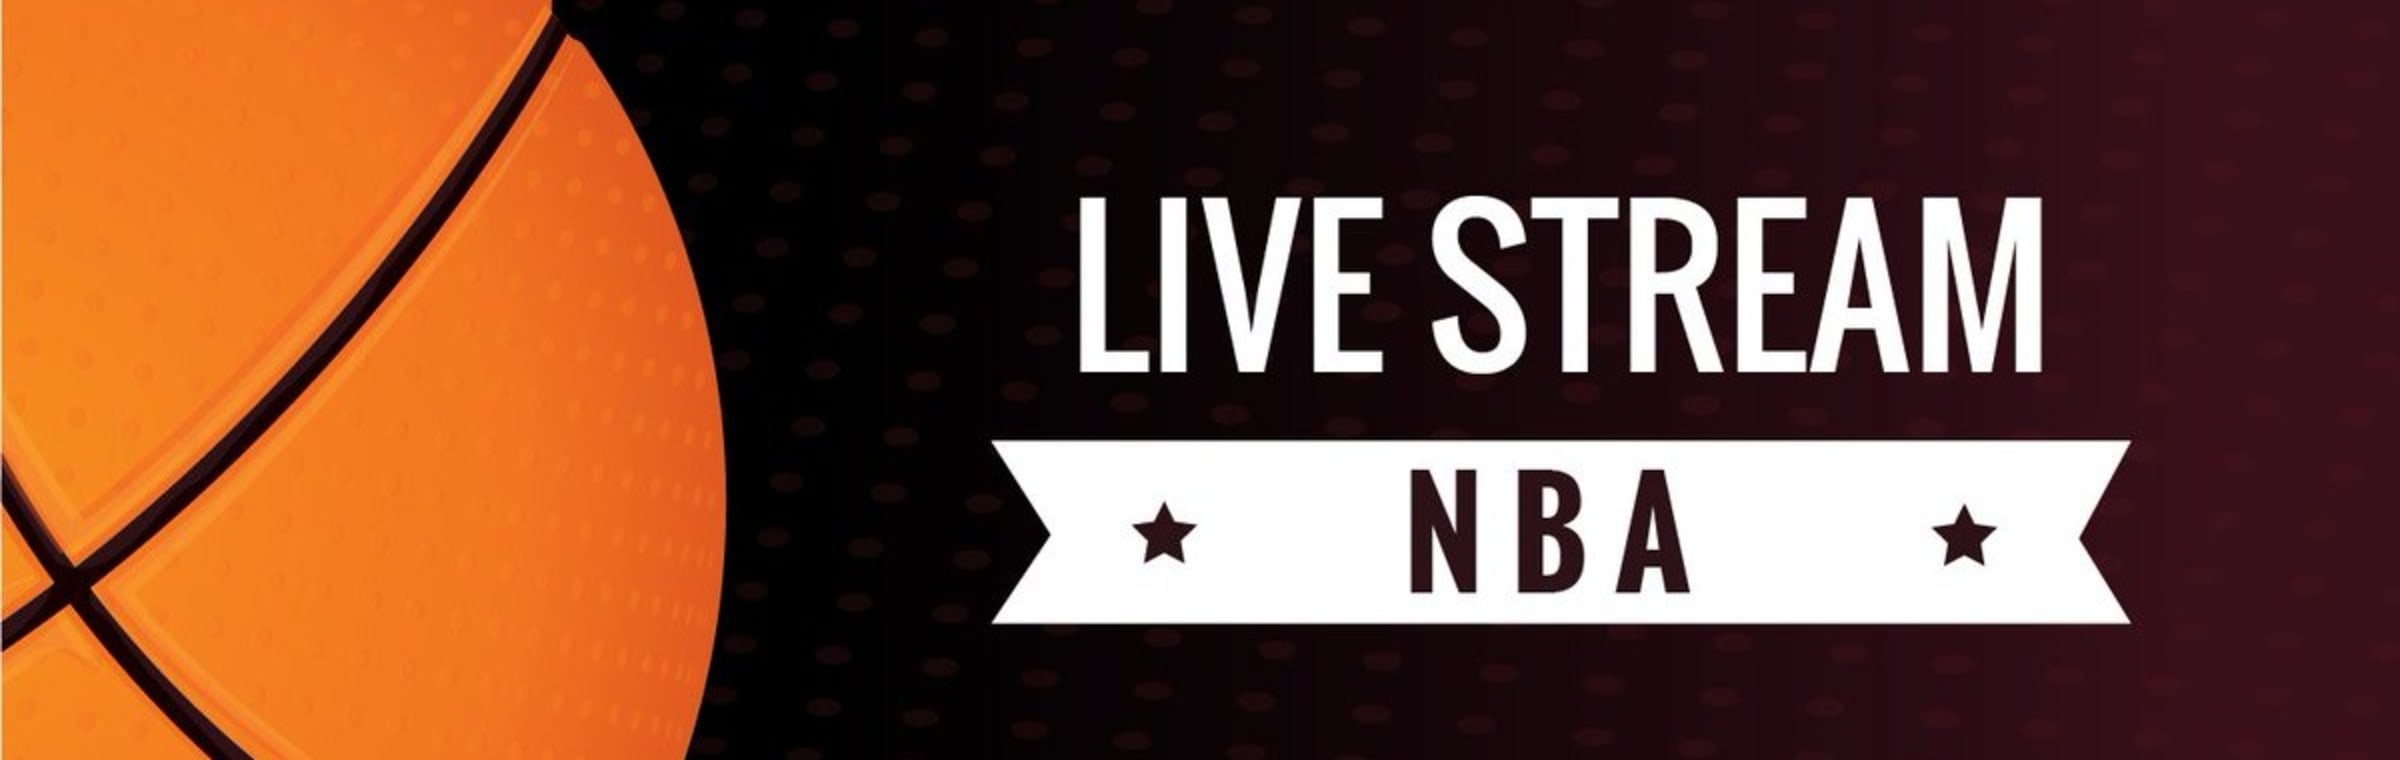 Live Magic Vs Suns Live Stream Online Free Show Reddit By Sportsnews Wikifactory